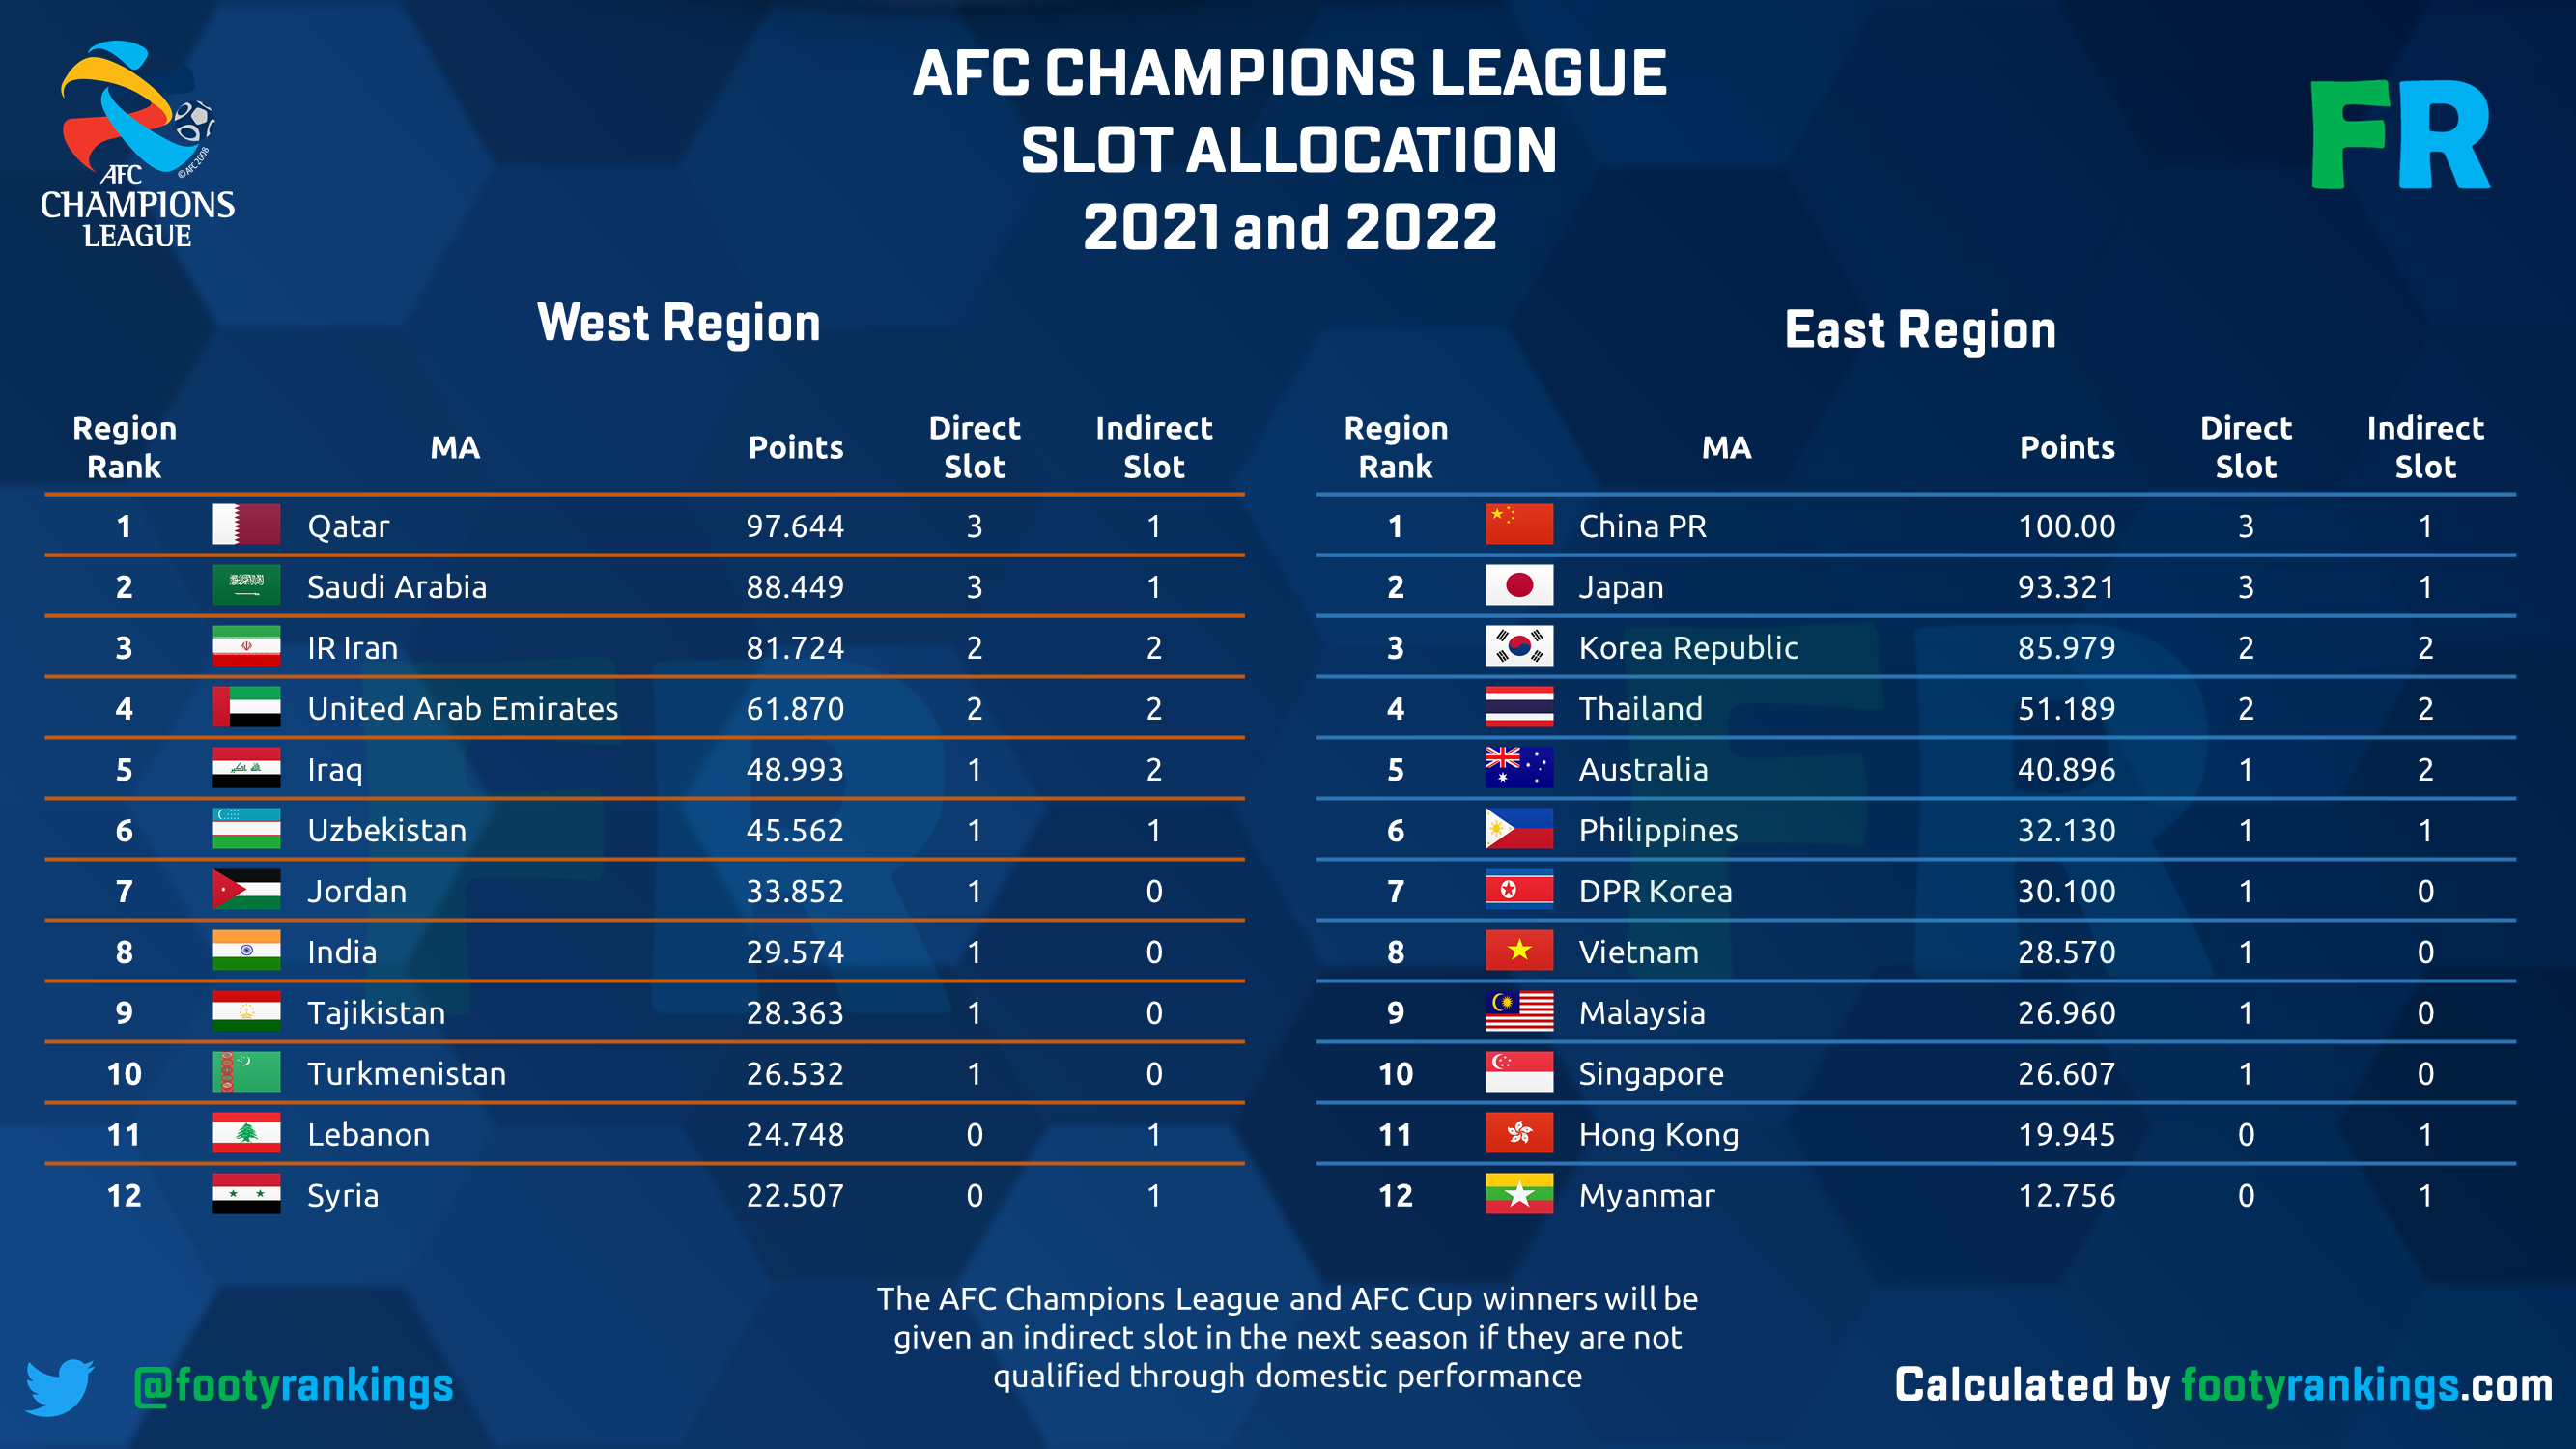 Footy Rankings on Twitter: "[AFC Champions League & AFC Cup slot  allocation] Here is the final slot allocation for AFC Champions League and  AFC Cup in 2021 and 2022 @TheAFCCL @AFCCup #ACL2021 #